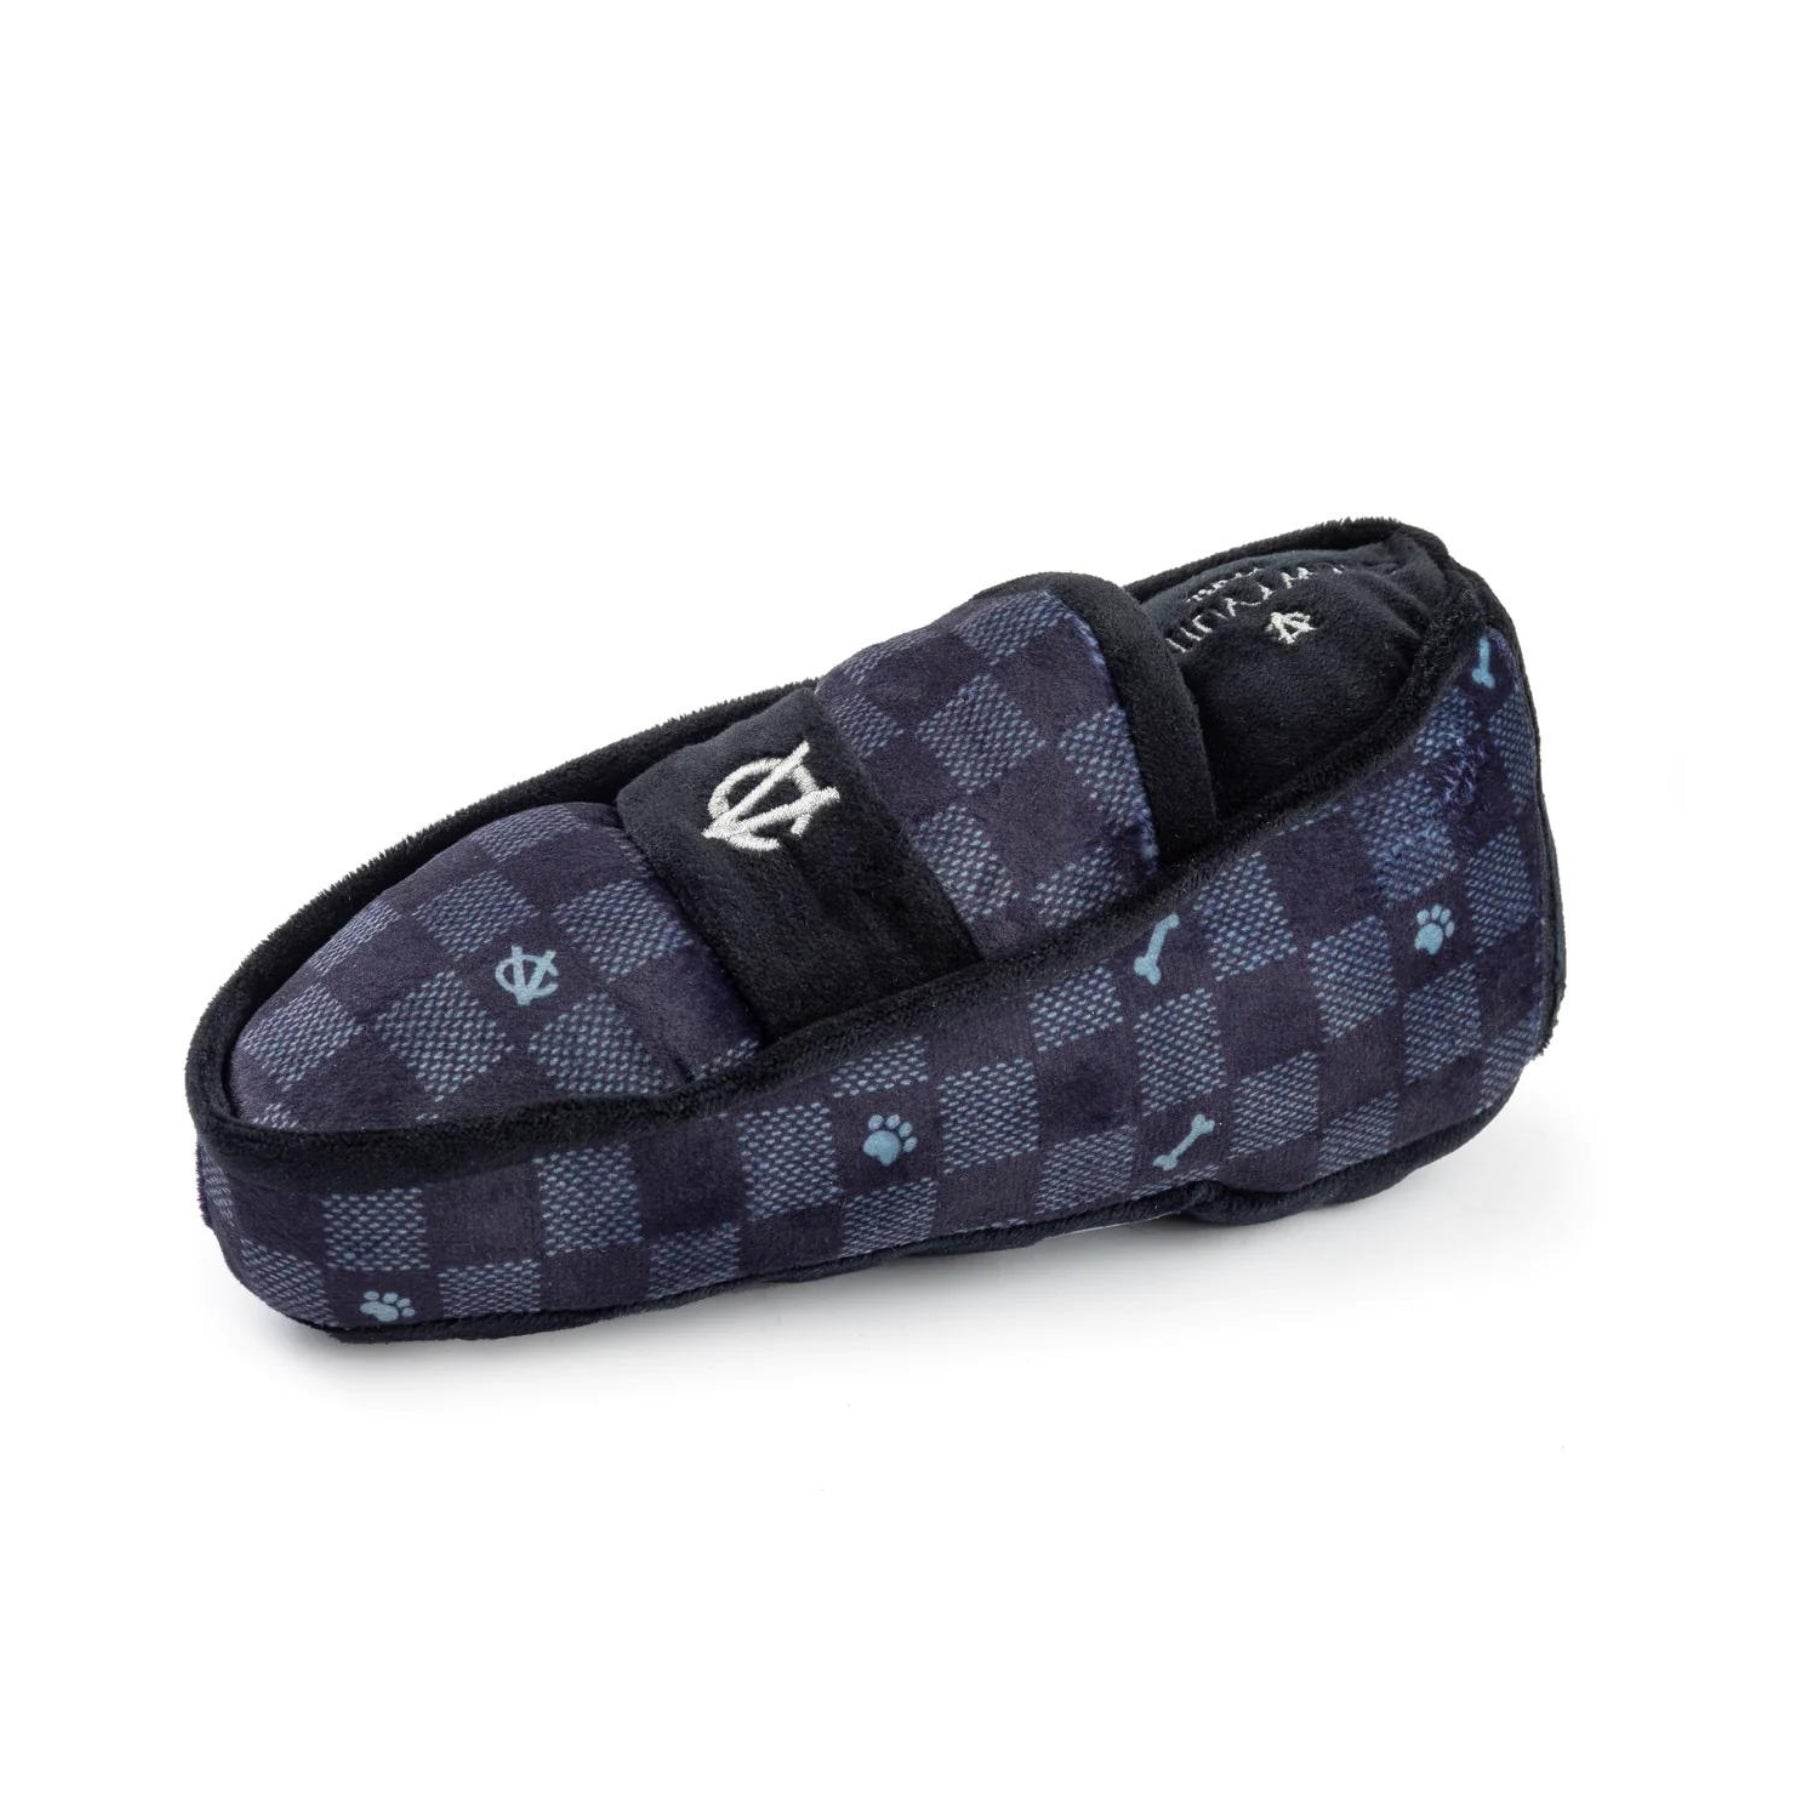 Black Checker Chewy Vuiton Loafer Dog Toy - Pooch Luxury